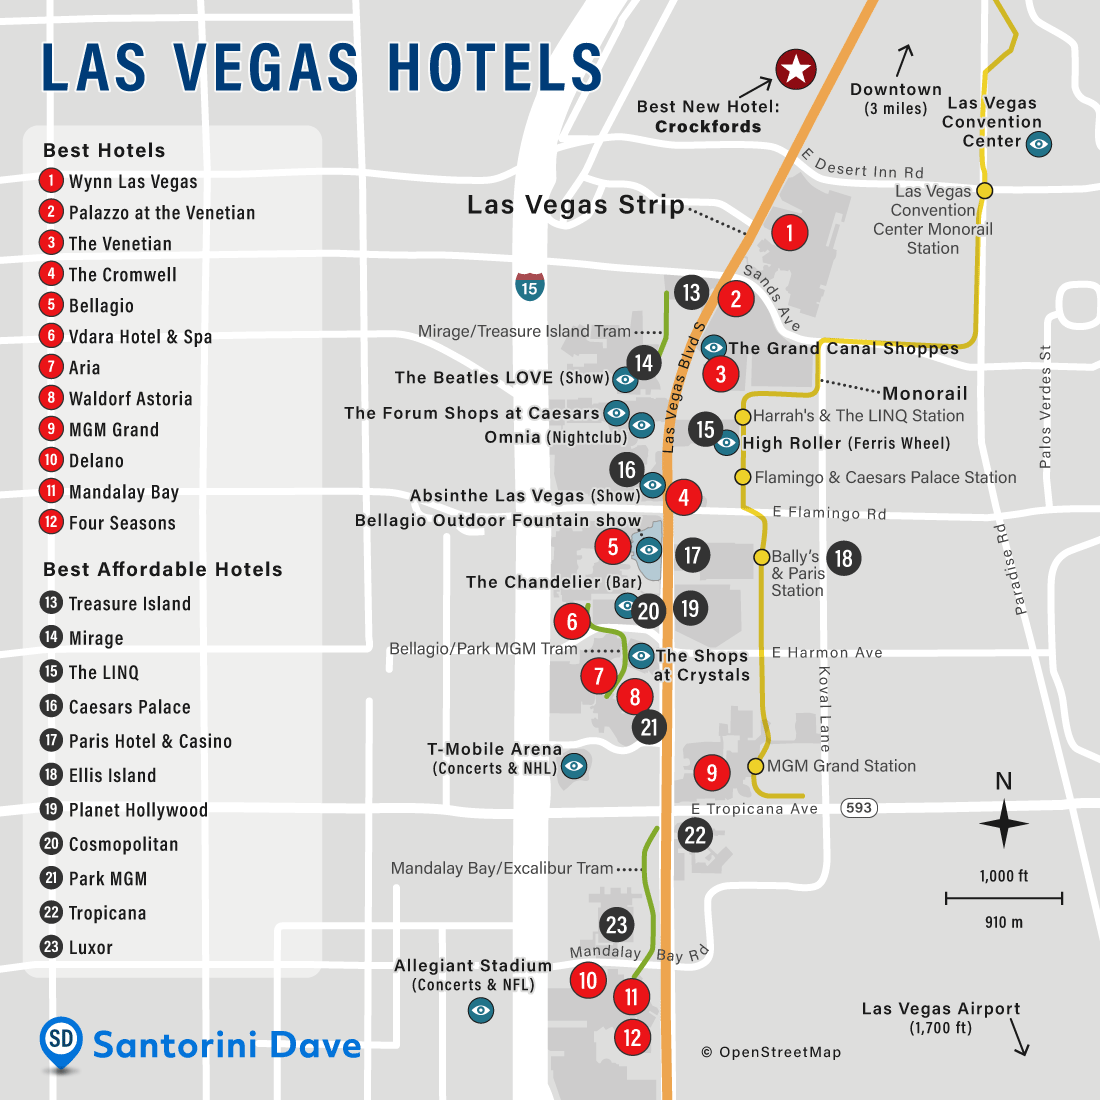 Map of resorts and hotels in Las Vegas.